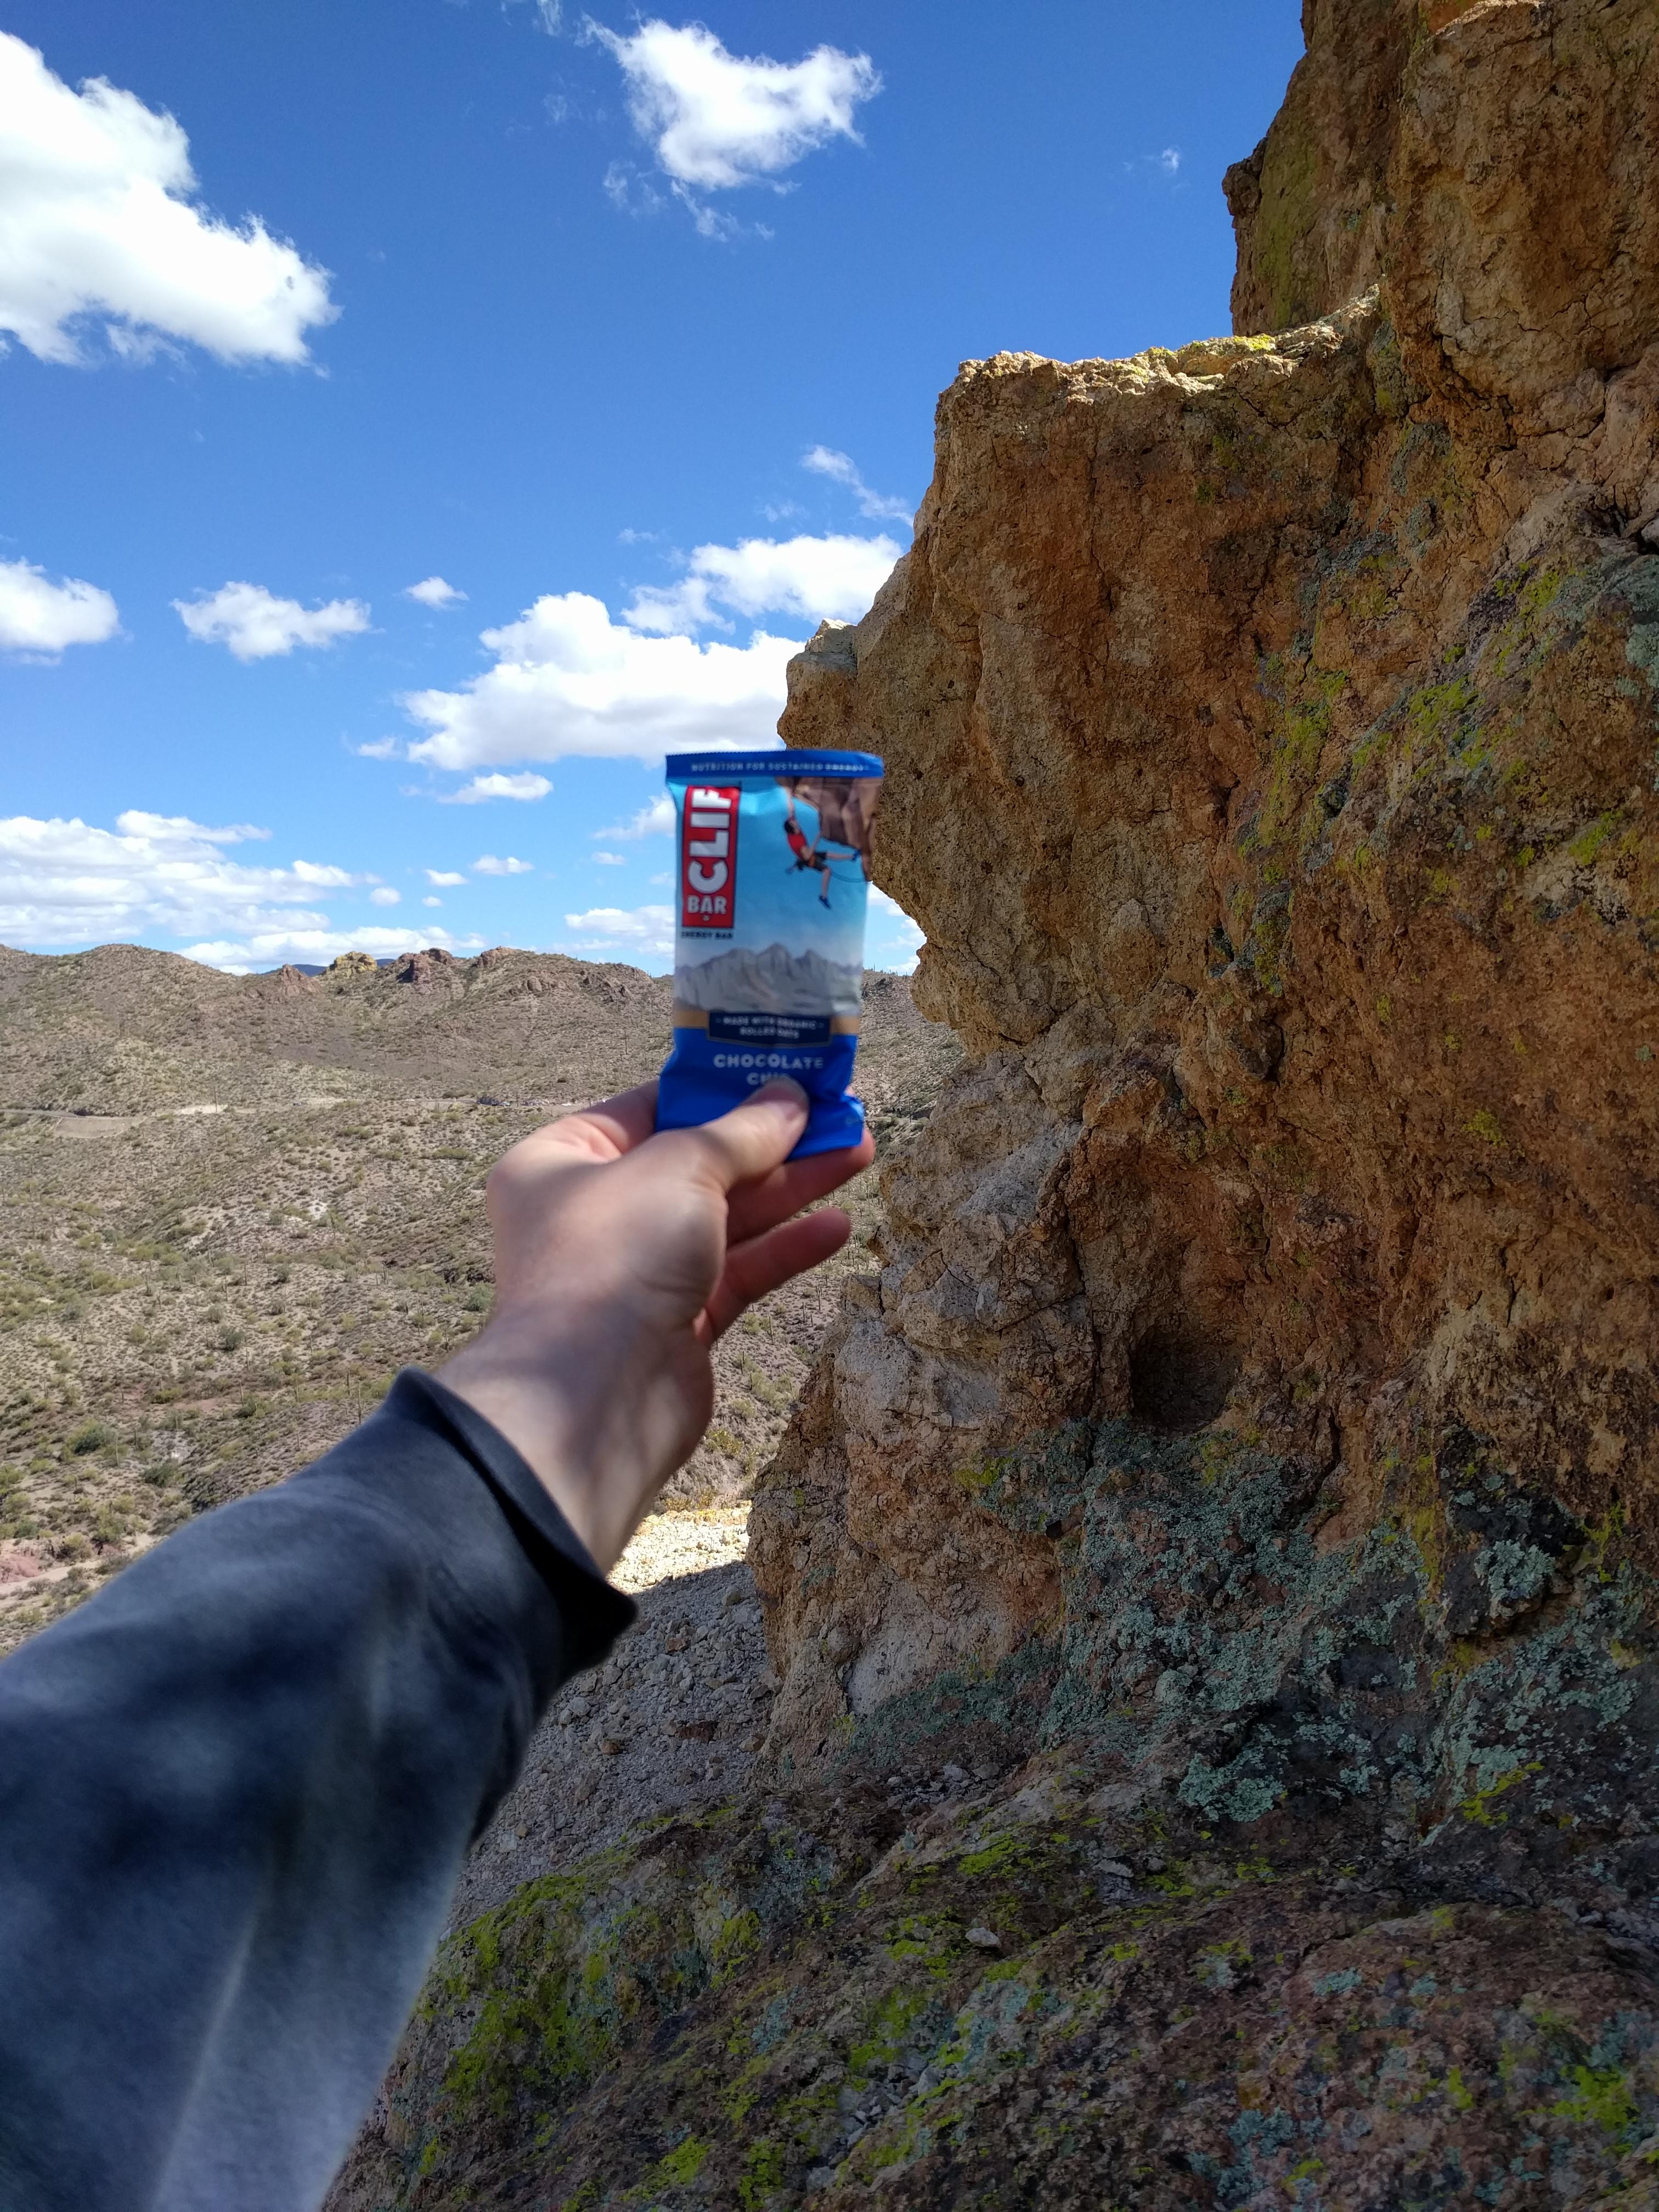 Found the cliff this Clif bar came from. : mildlyinteresting